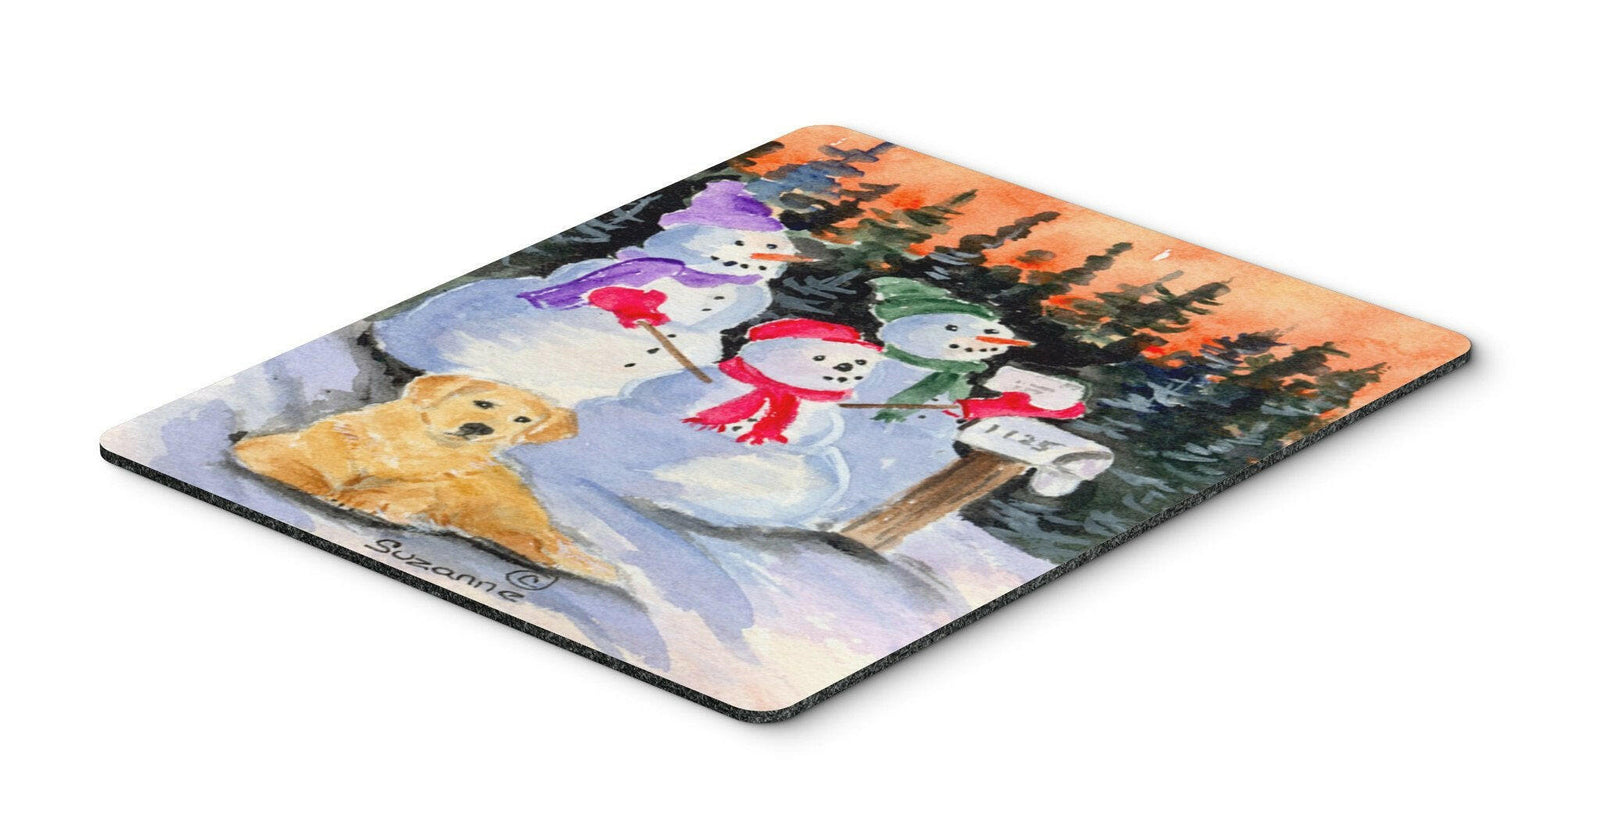 Snowman with Golden Retriever Mouse Pad / Hot Pad / Trivet by Caroline's Treasures